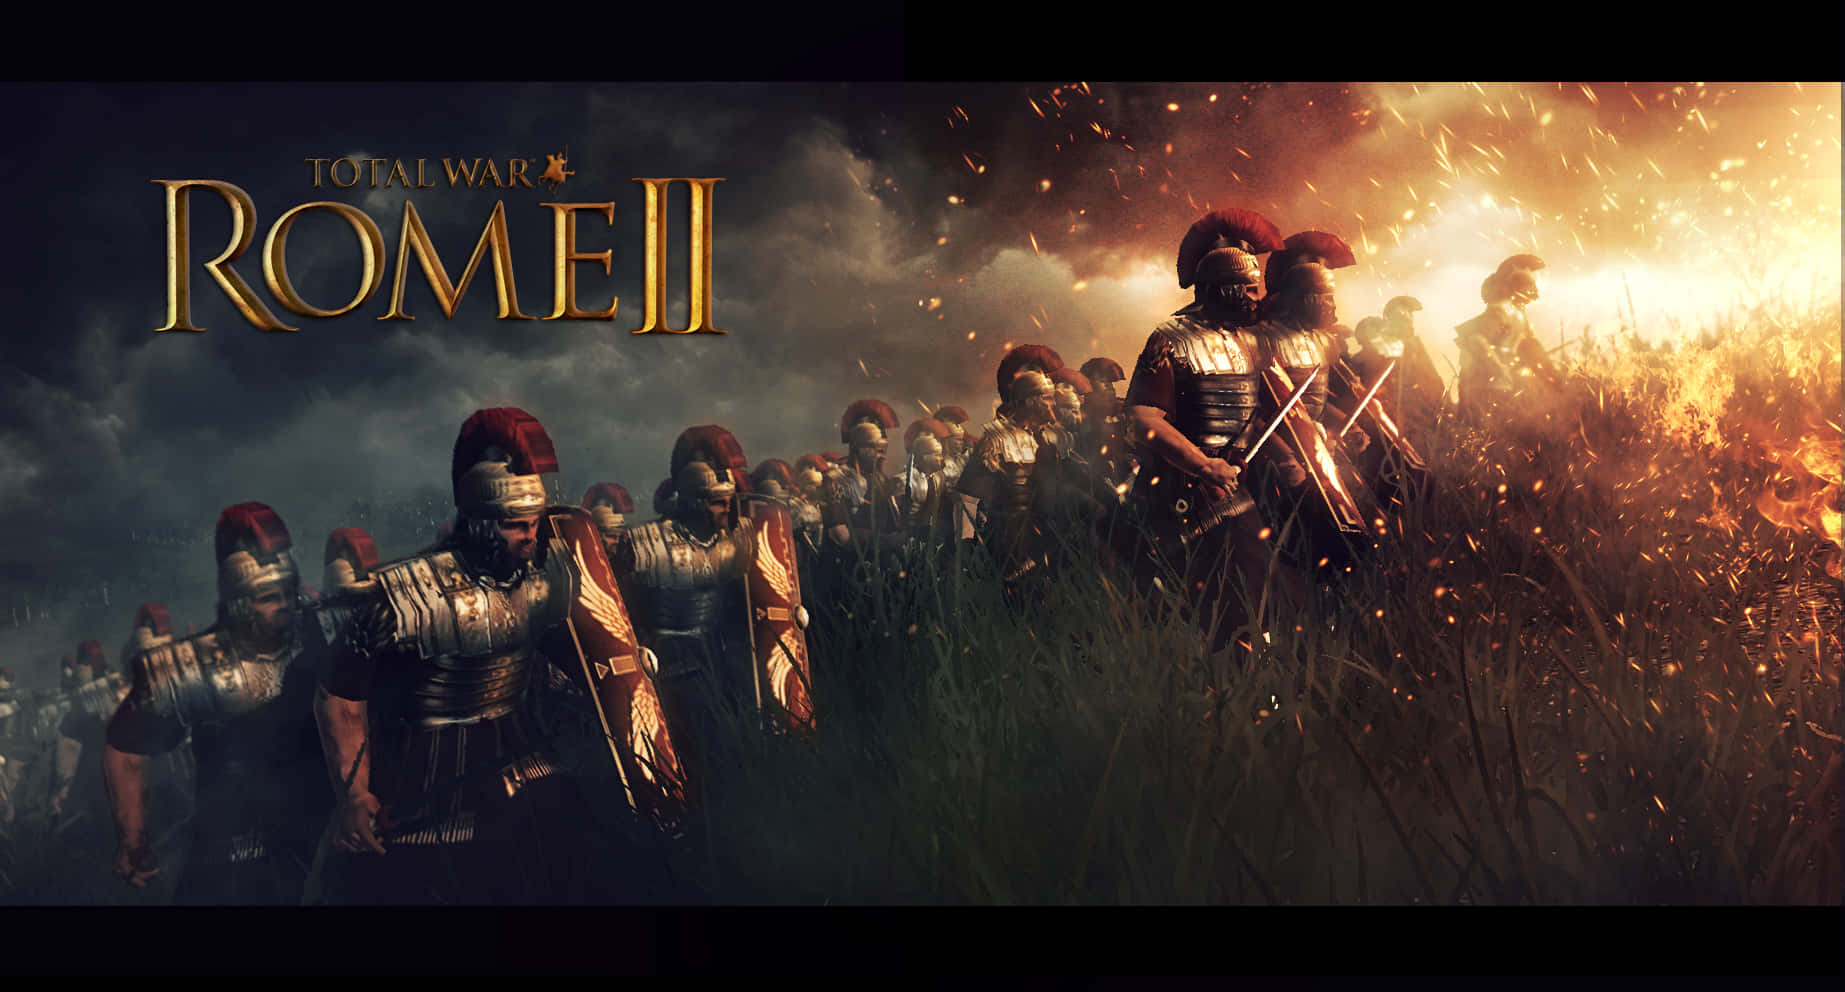 Battle on General during Total War: Rome 2